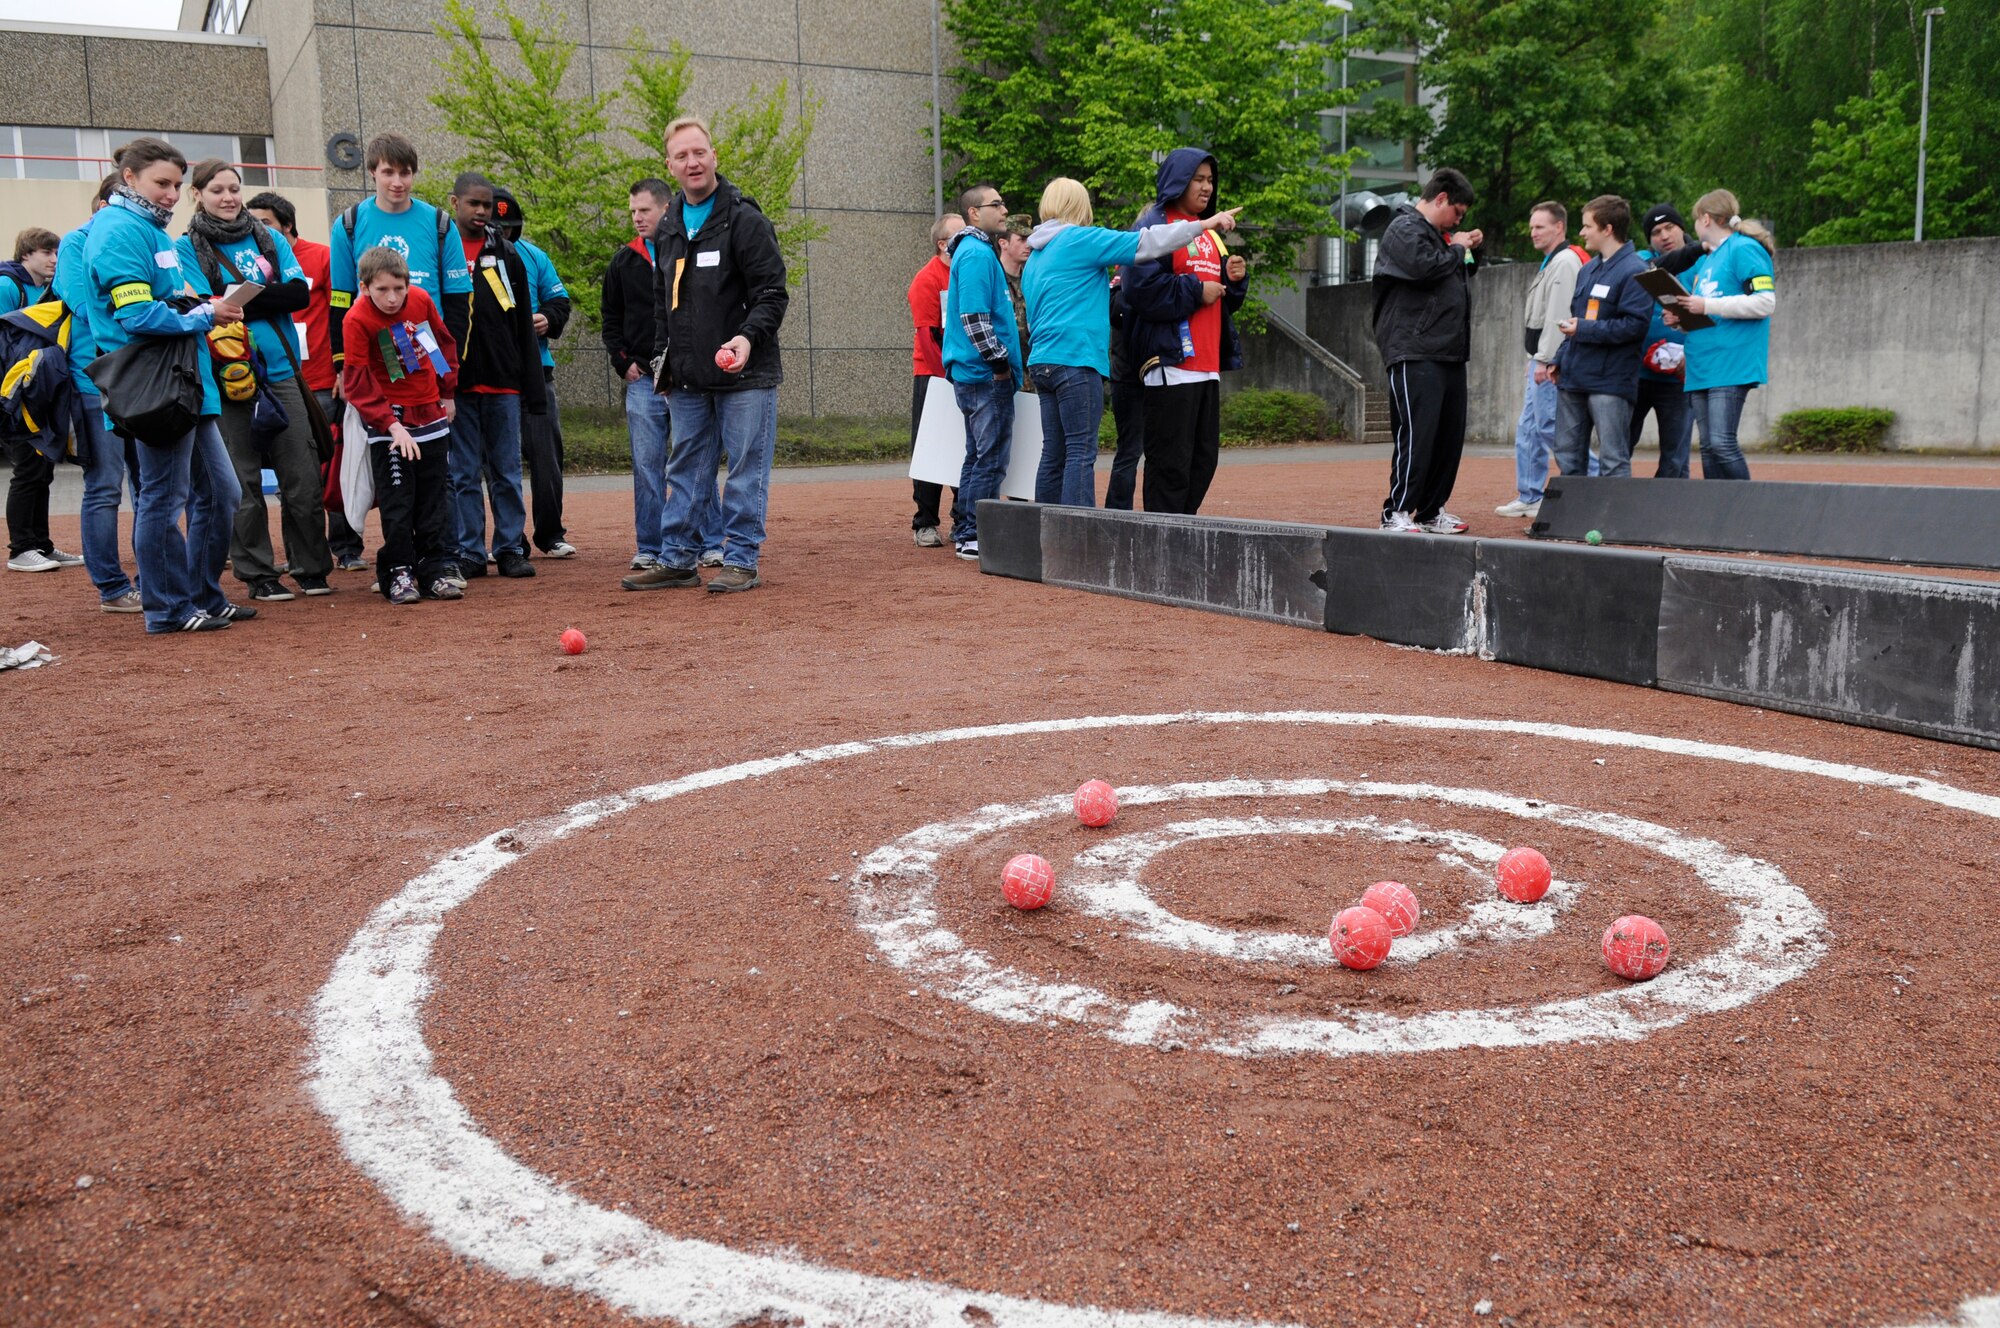 An athlete participates in a game of target ball during the Special Olympics, Enkenbach-Alsenborn, Germany, May 12, 2010. Special Olympics is a worldwide event for children and adults with disabilities to build confidence and foster friendship. The Kaiserslautern Military Community hosted its 27th Annual Special Olympics for over 800 athletes. (U.S. Air Force photo by Airman 1st Class Brittany Perry)